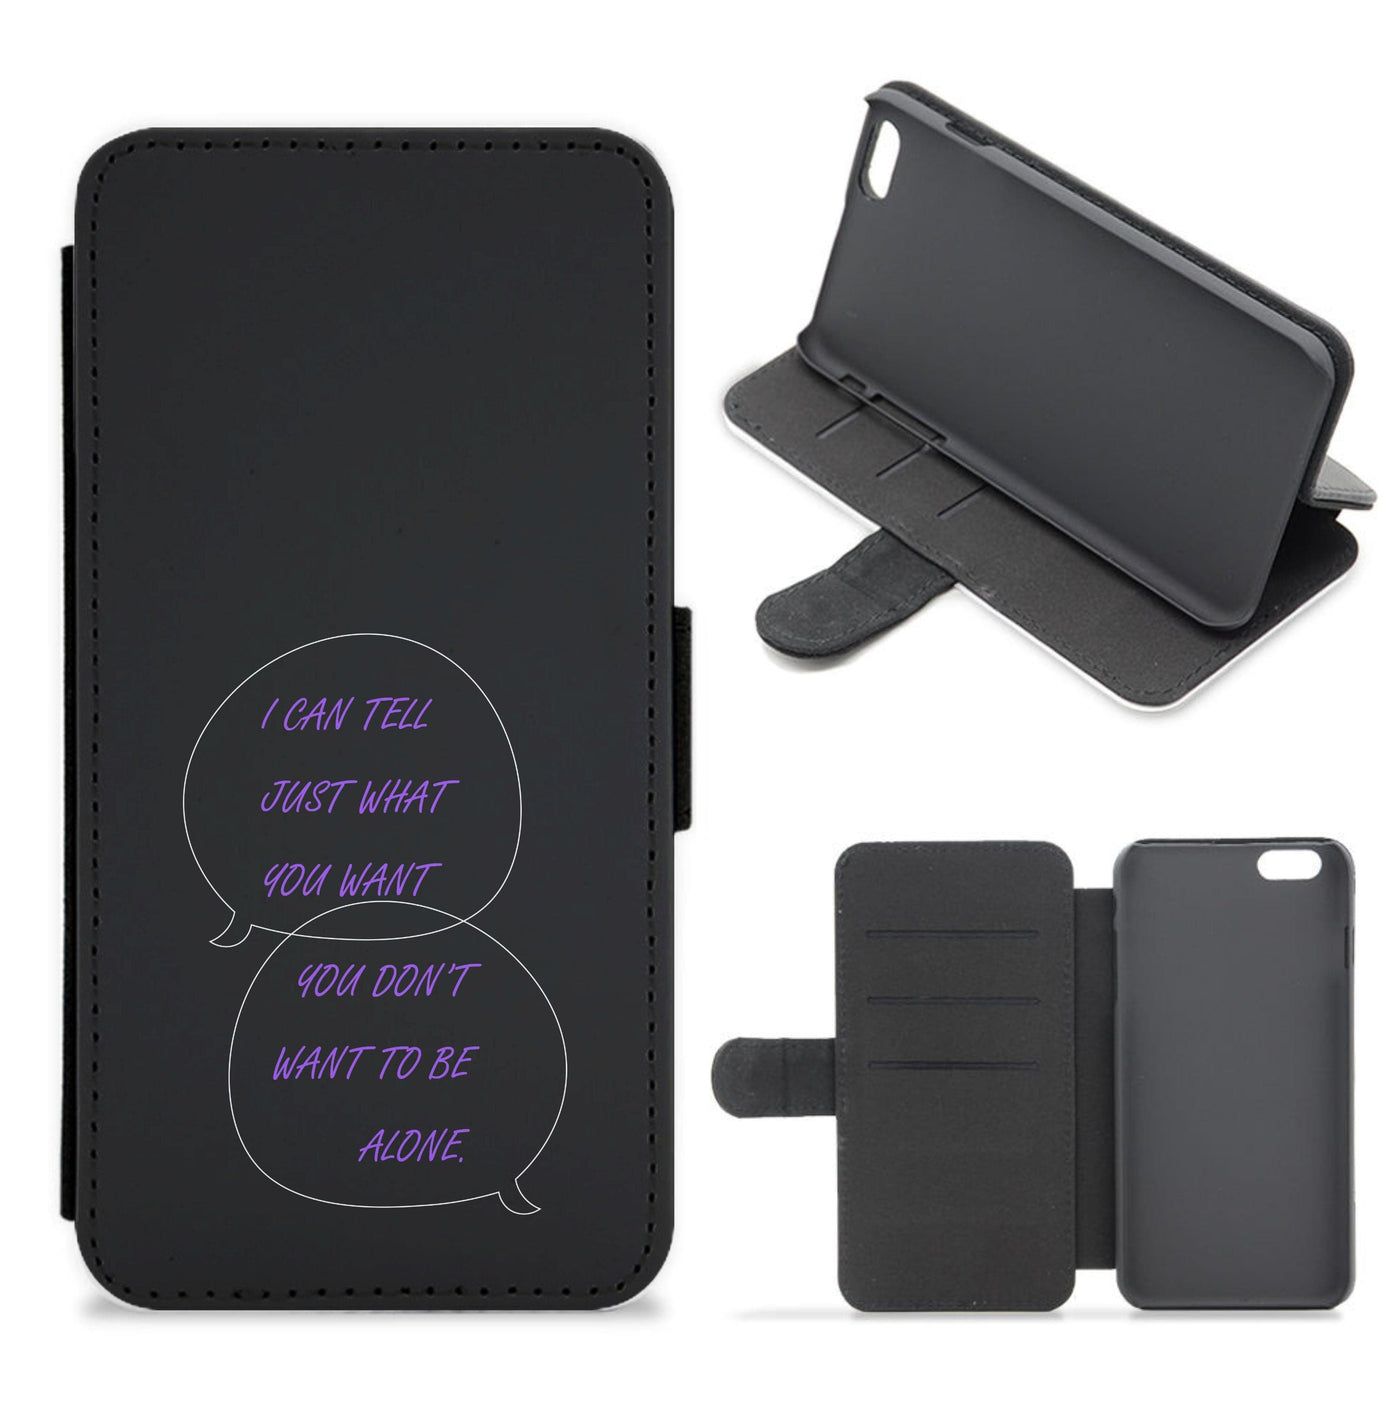 You Don't Want To Be Alone - Festival Flip / Wallet Phone Case